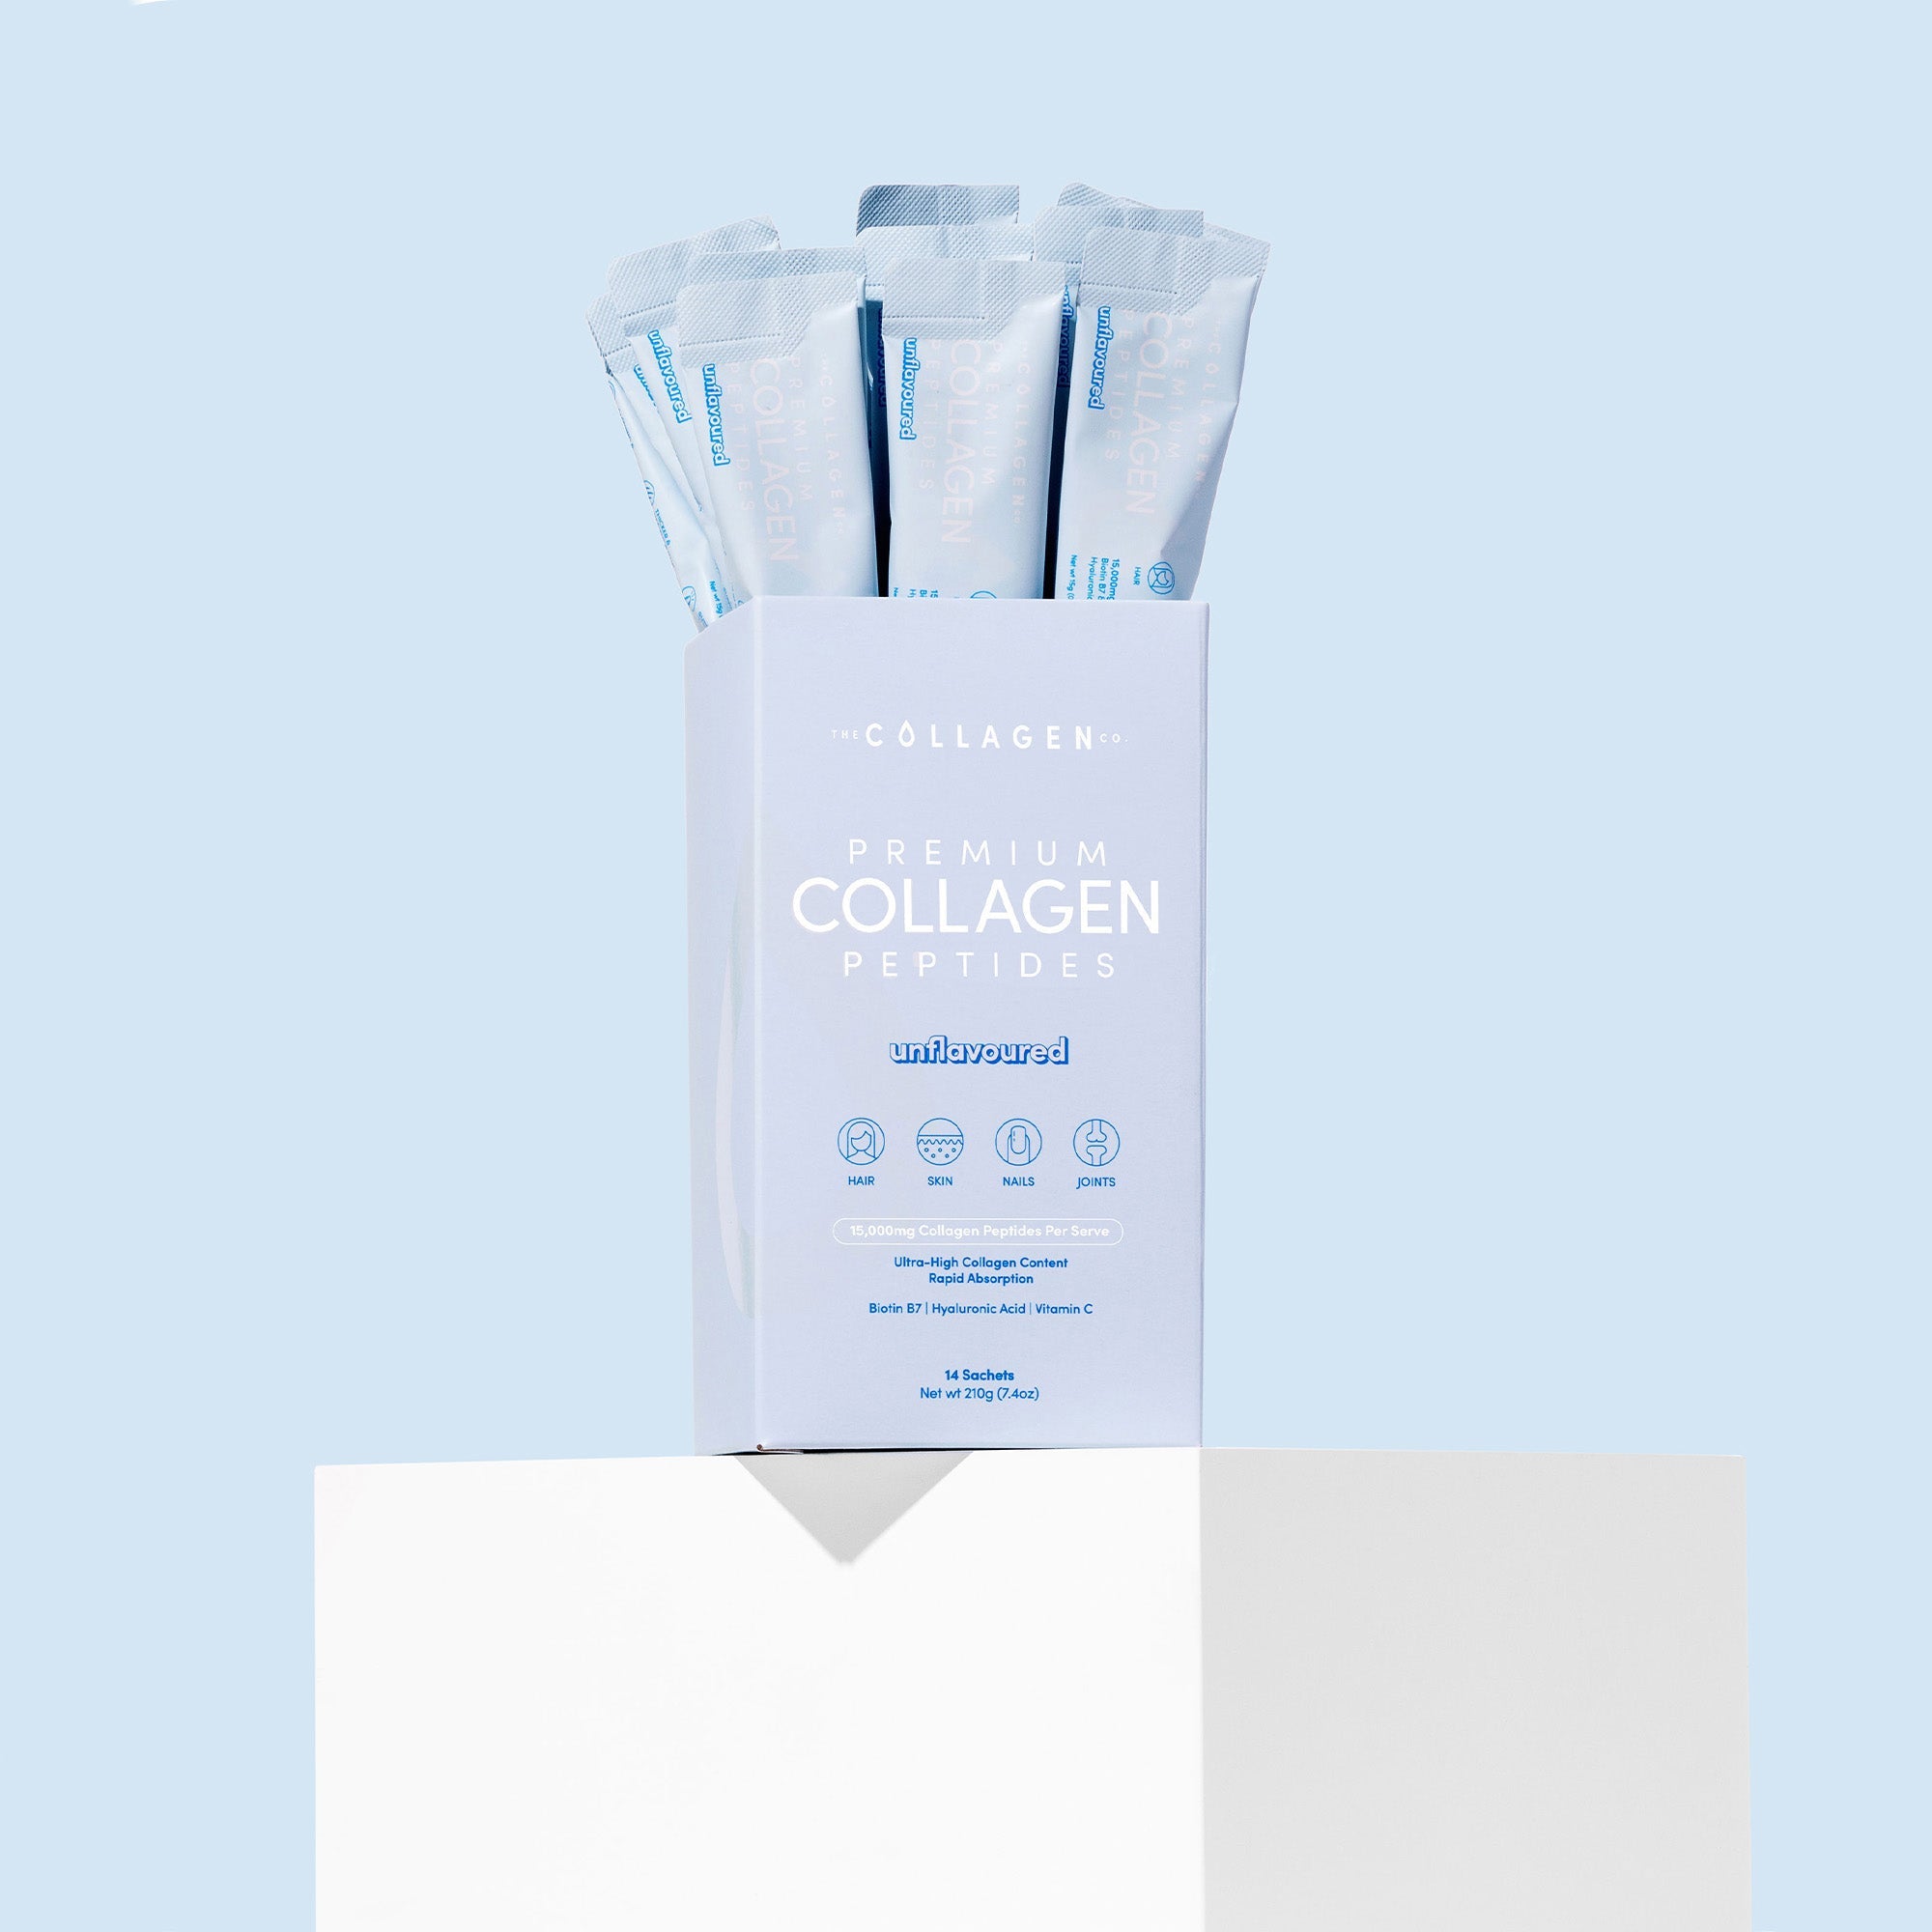 Glow On The Go Bundle - The Collagen Co.